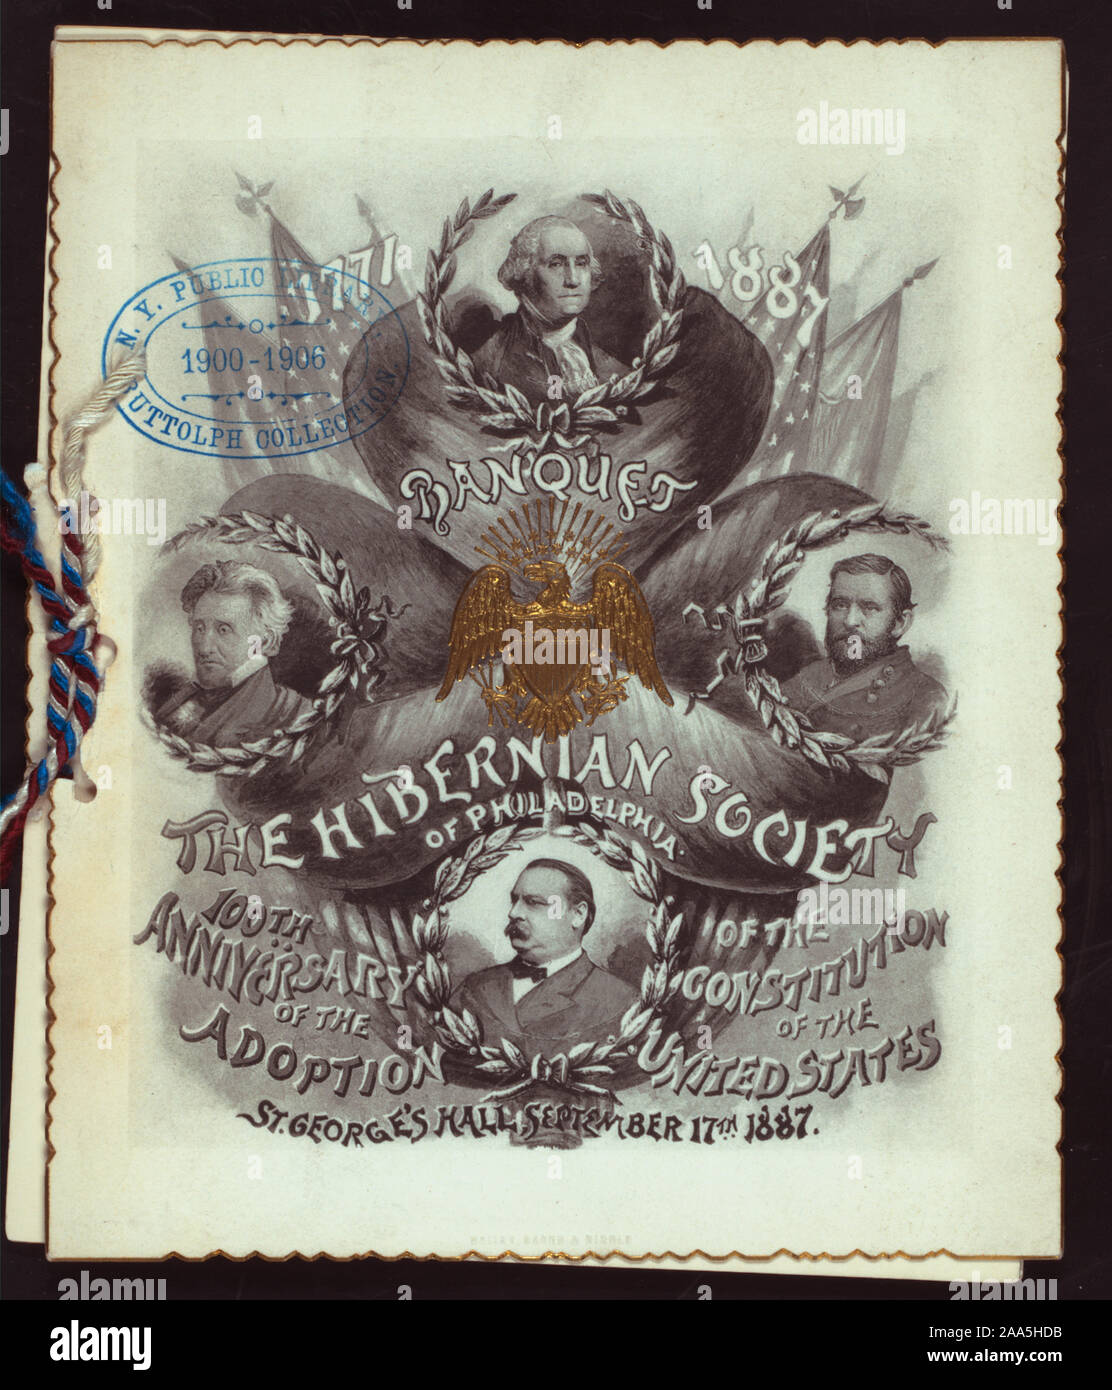 DRAWINGS OF PROMINENT AMERICANS; PROGRAM; TIED WITH RED, WHITE, AND BLUE CORD;; BANQUET COMMEMORATING THE 100TH ANNIVERSARY OF THE CONSTITUTION [held by] HIBERNIAN SOCIETY OF PHILADELPHIA [at] ST. GEORGE'S HALL PHILADELPHIA, PA (CLUB) Stock Photo